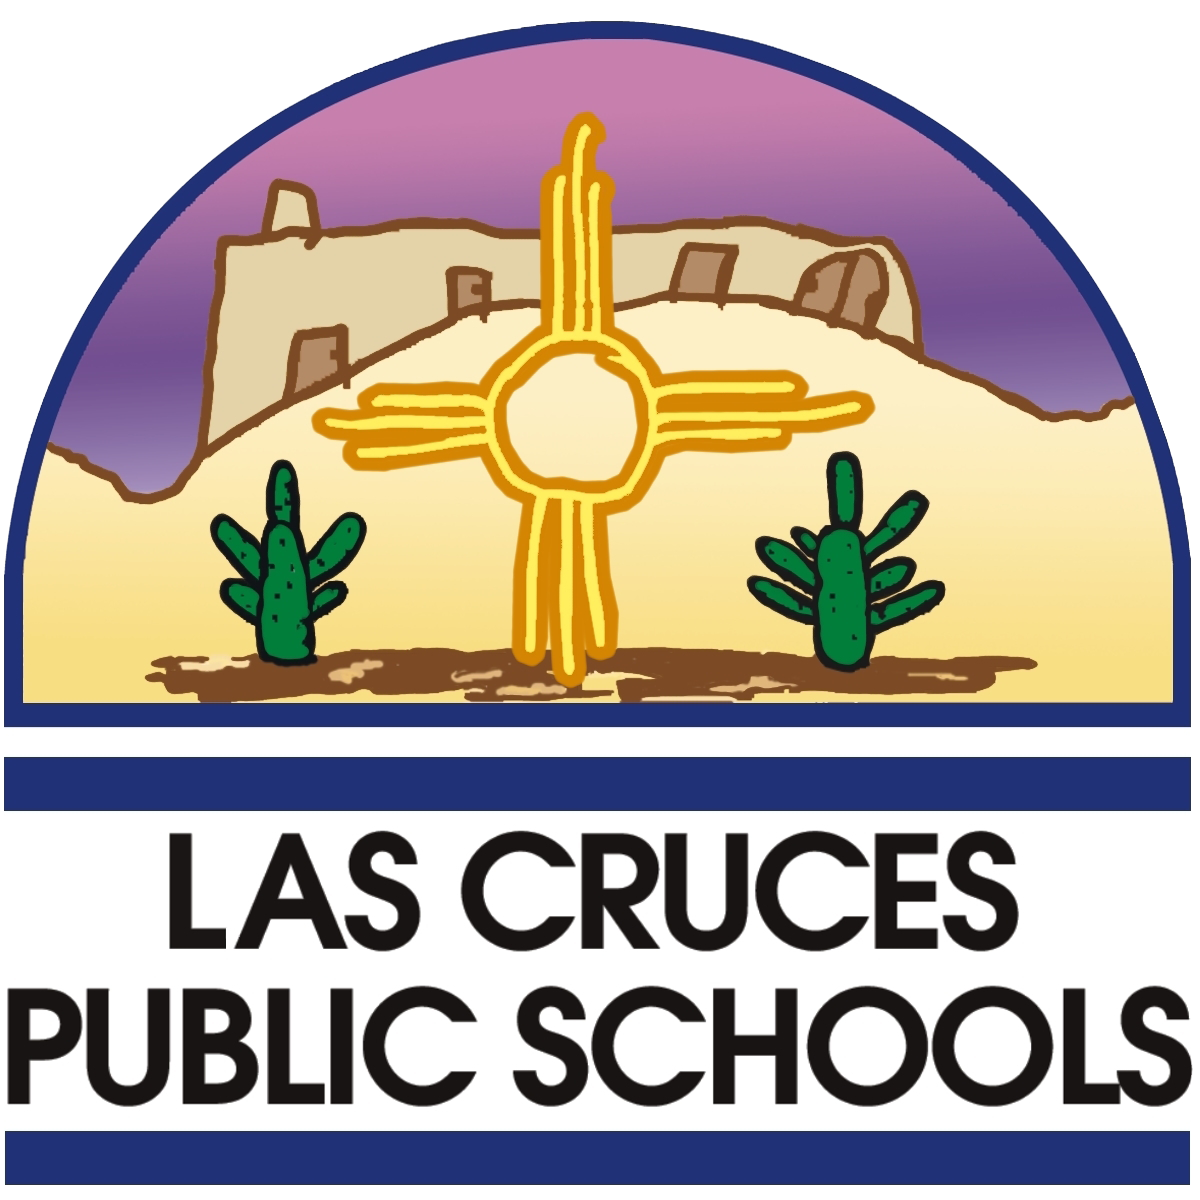 Las Cruces Public Schools is the 2nd-largest public school district in NM, and goes above and beyond for almost 25,000 students — every student, every day.